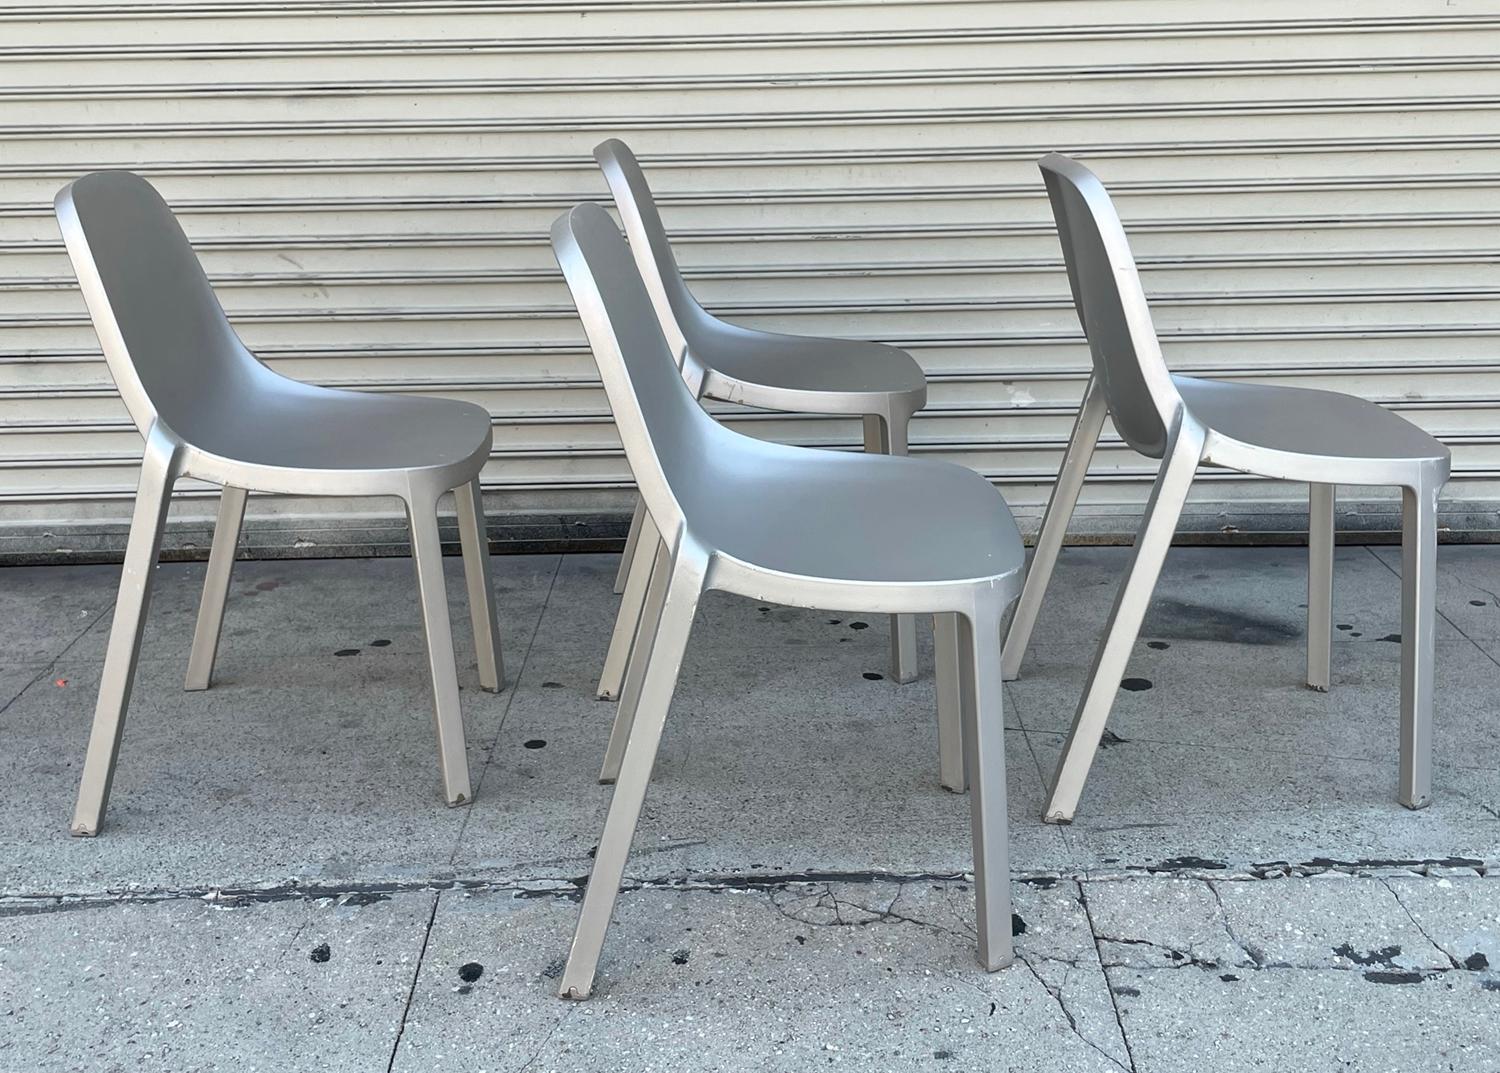 Contemporary Set of 4 Broom Chairs by Philippe Starck for Emeco